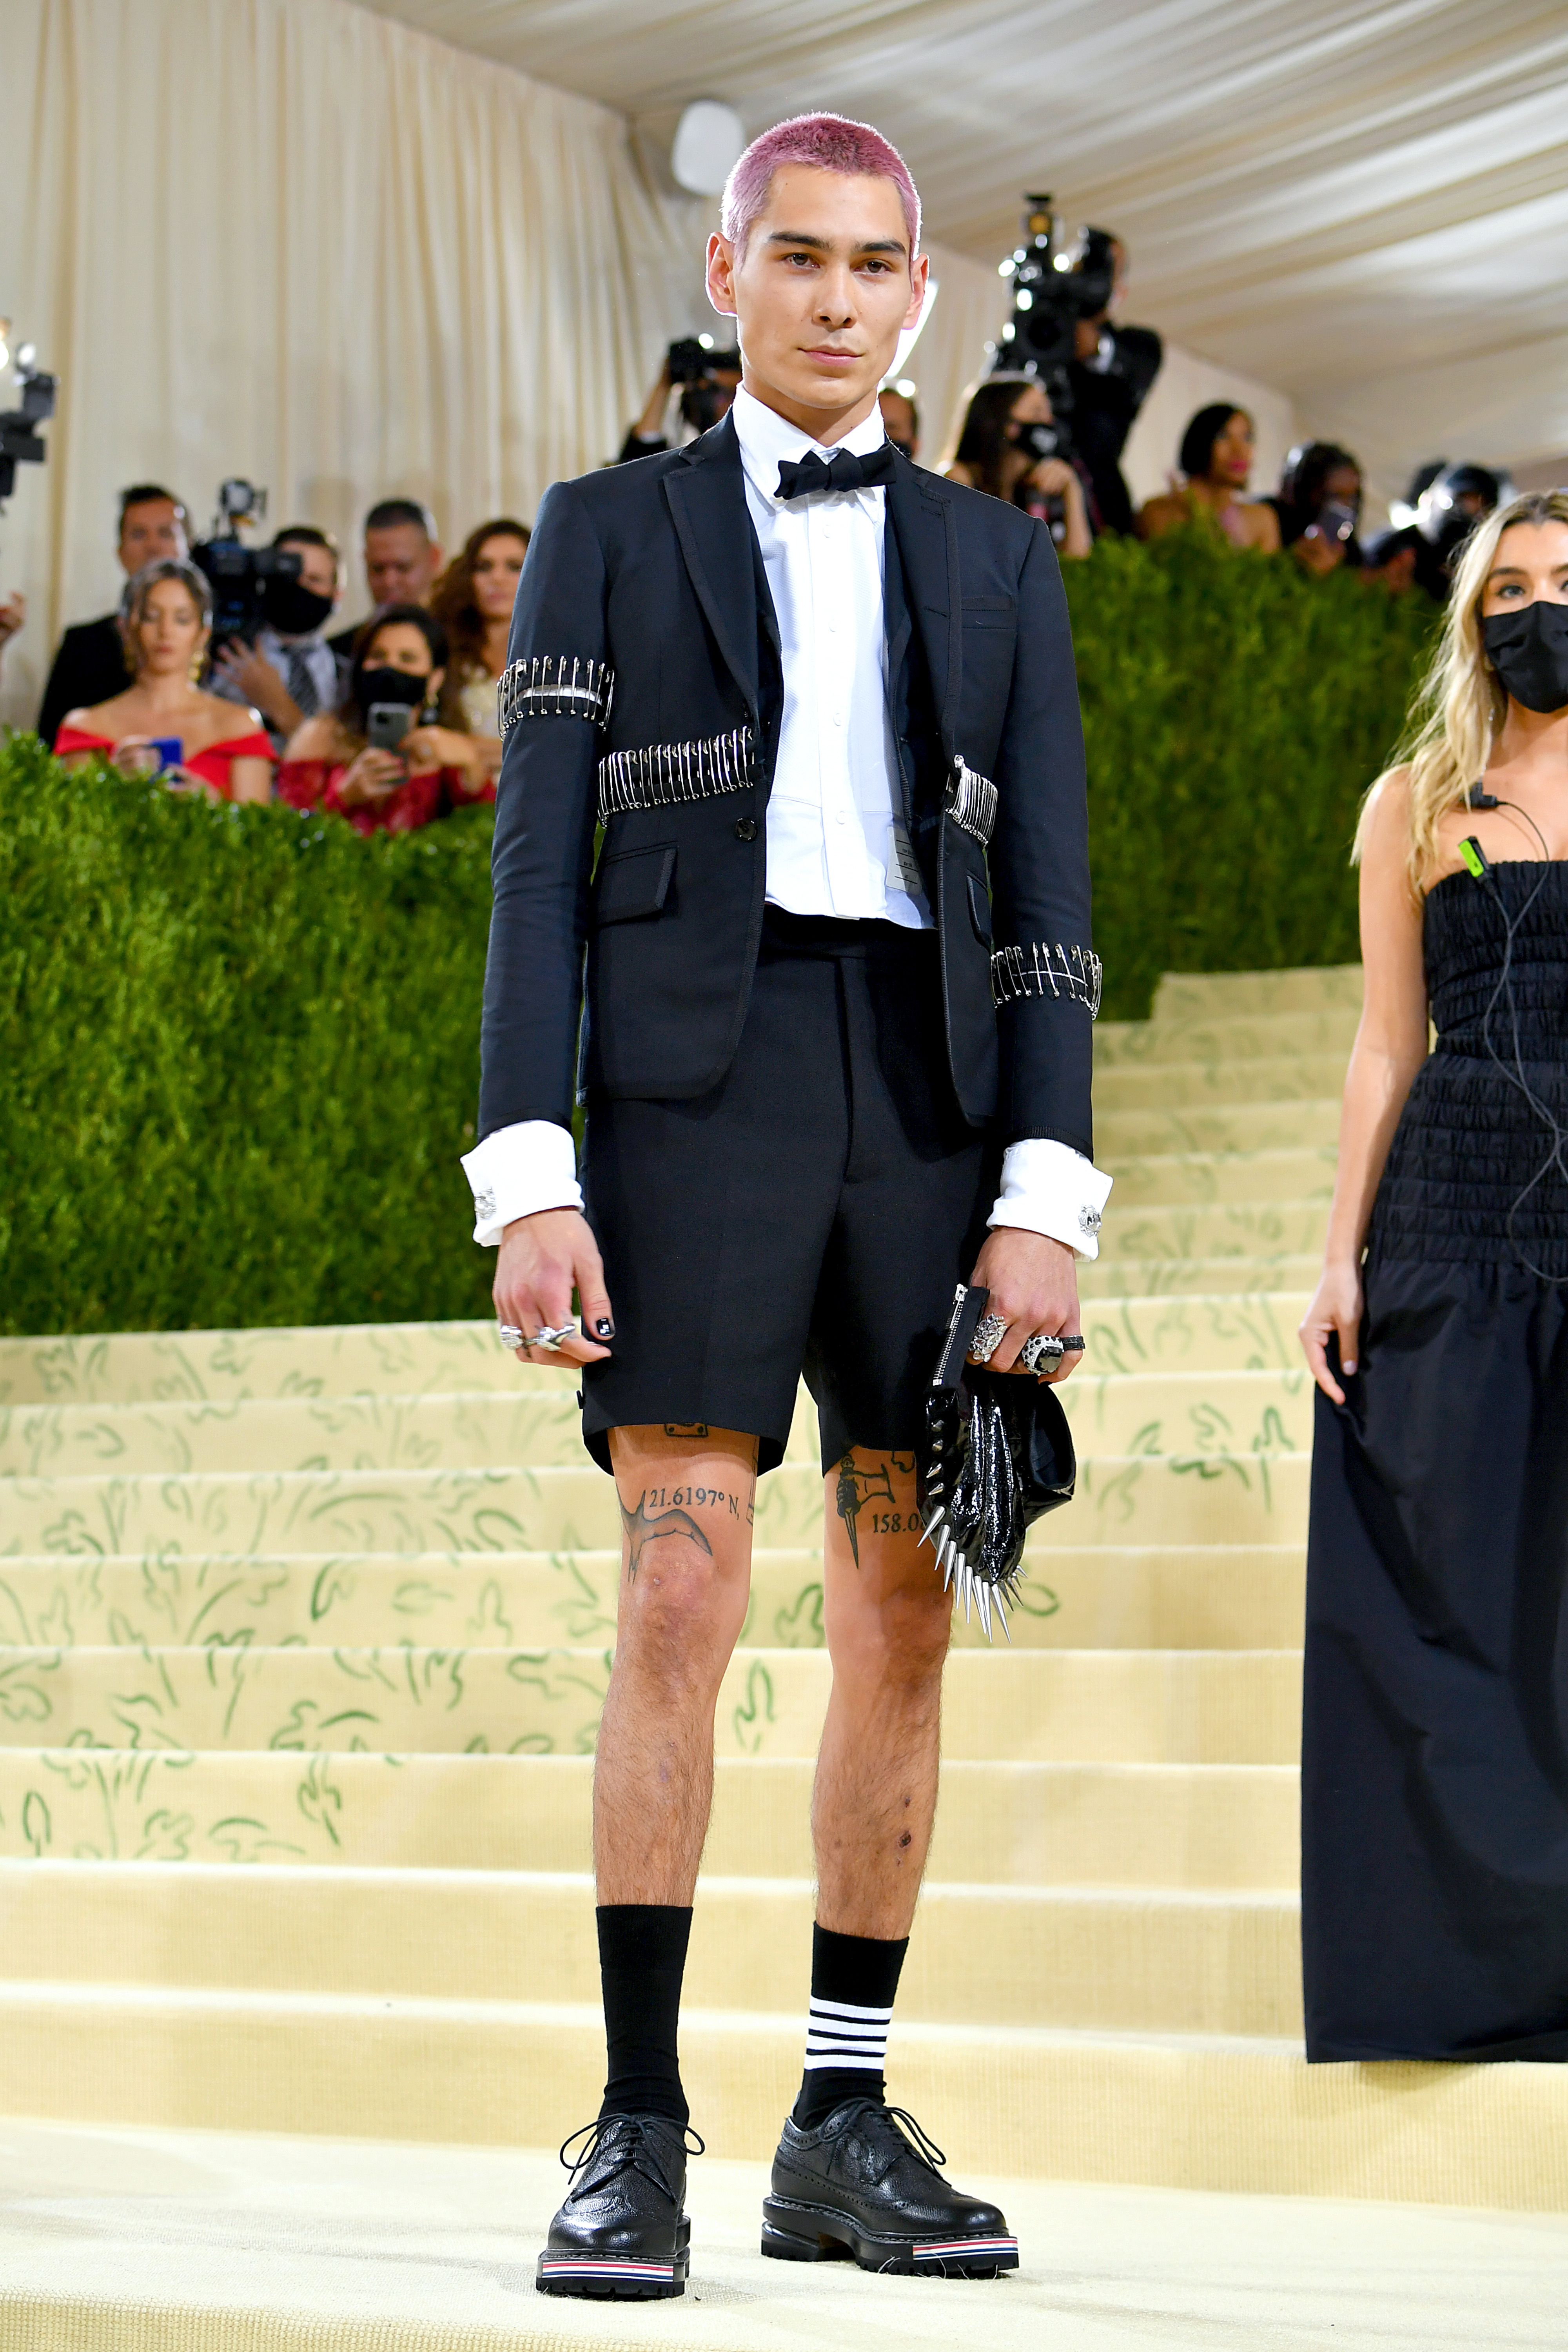 The Most Wild, Wonderful, and American(ish) Menswear at the Met Gala 2021